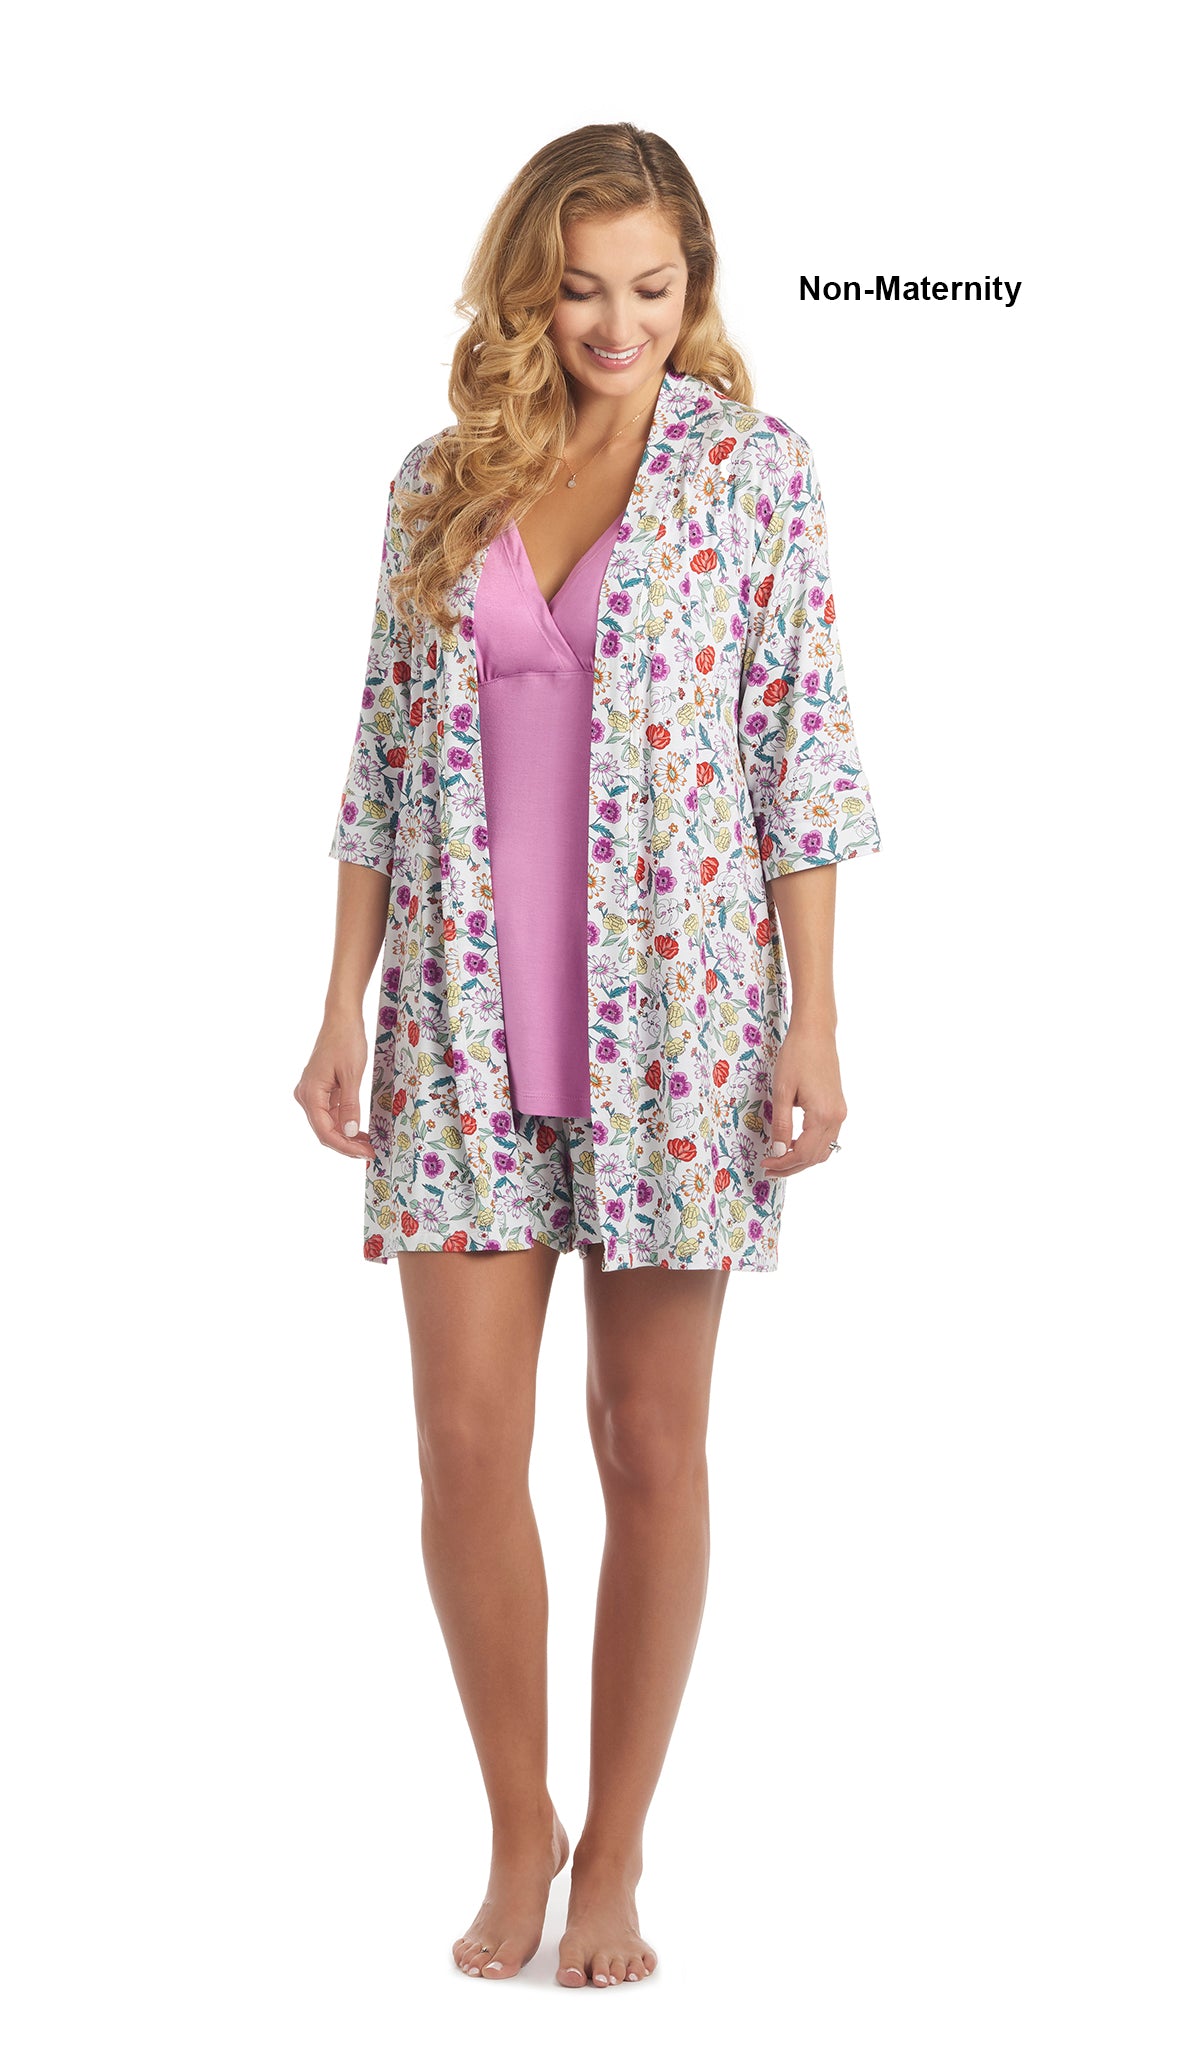 Zinnia Adaline 3-Piece Set. Woman wearing 3/4 sleeve robe, tank top and short as non-maternity.